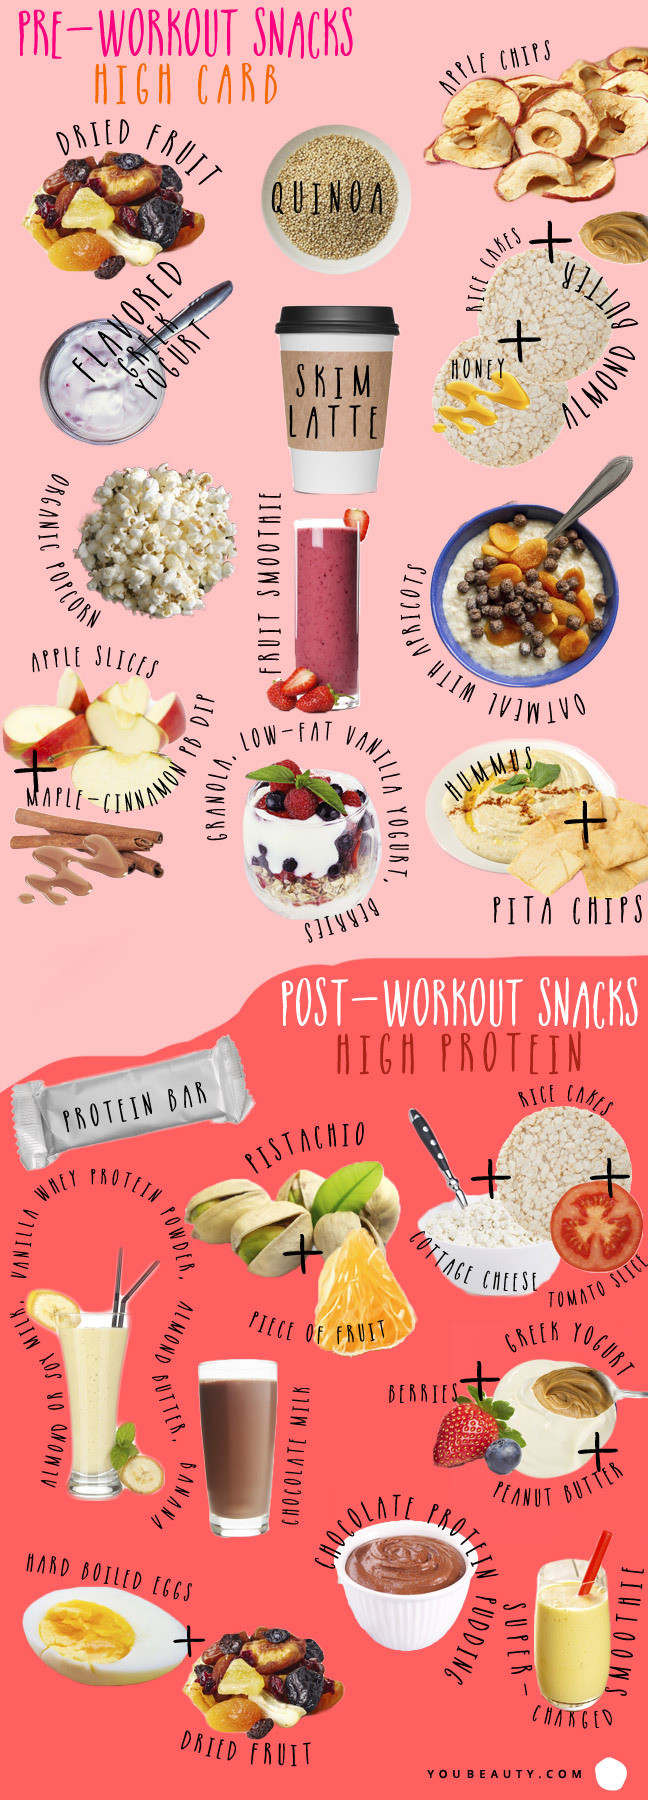 Healthy Pre Workout Snacks
 Nutritionist Approved Pre and Post Workout Snacks